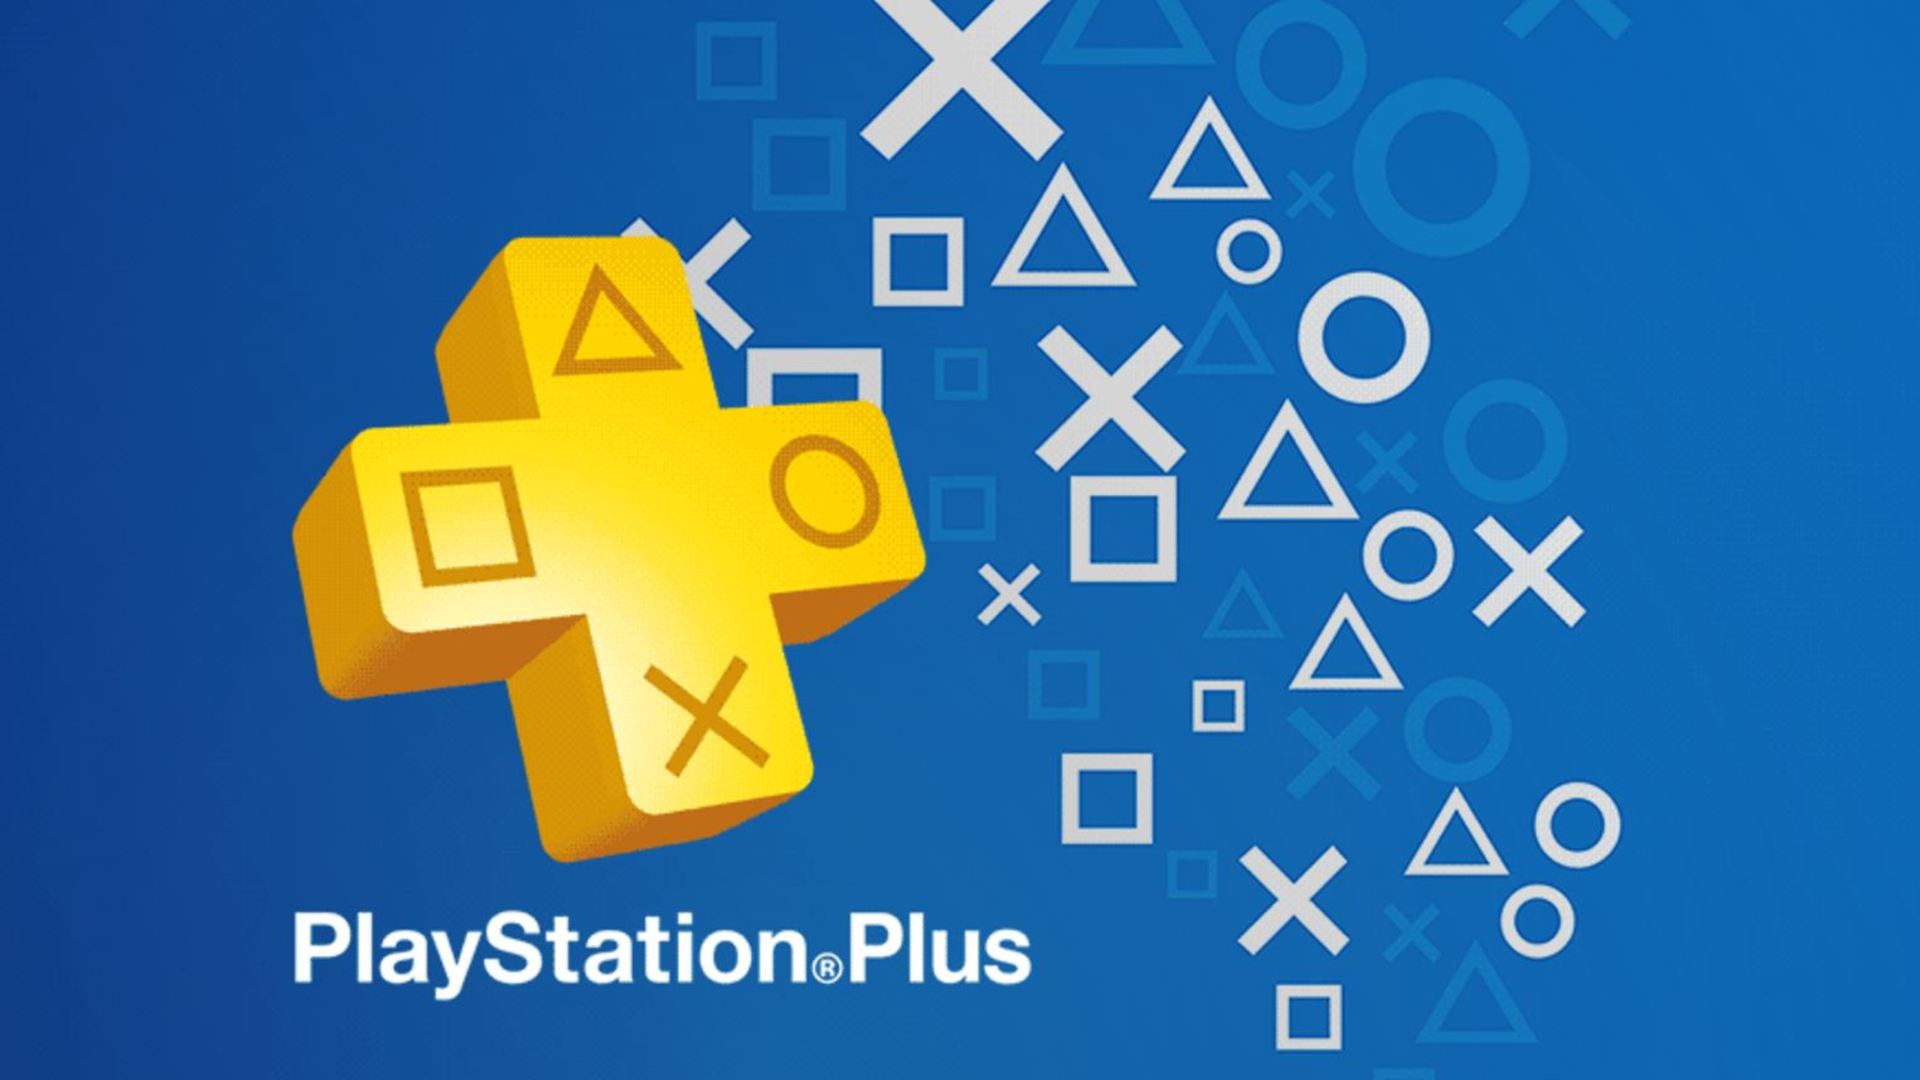 Get 15 months of PlayStation Plus for £34.99 today • Eurogamer.net